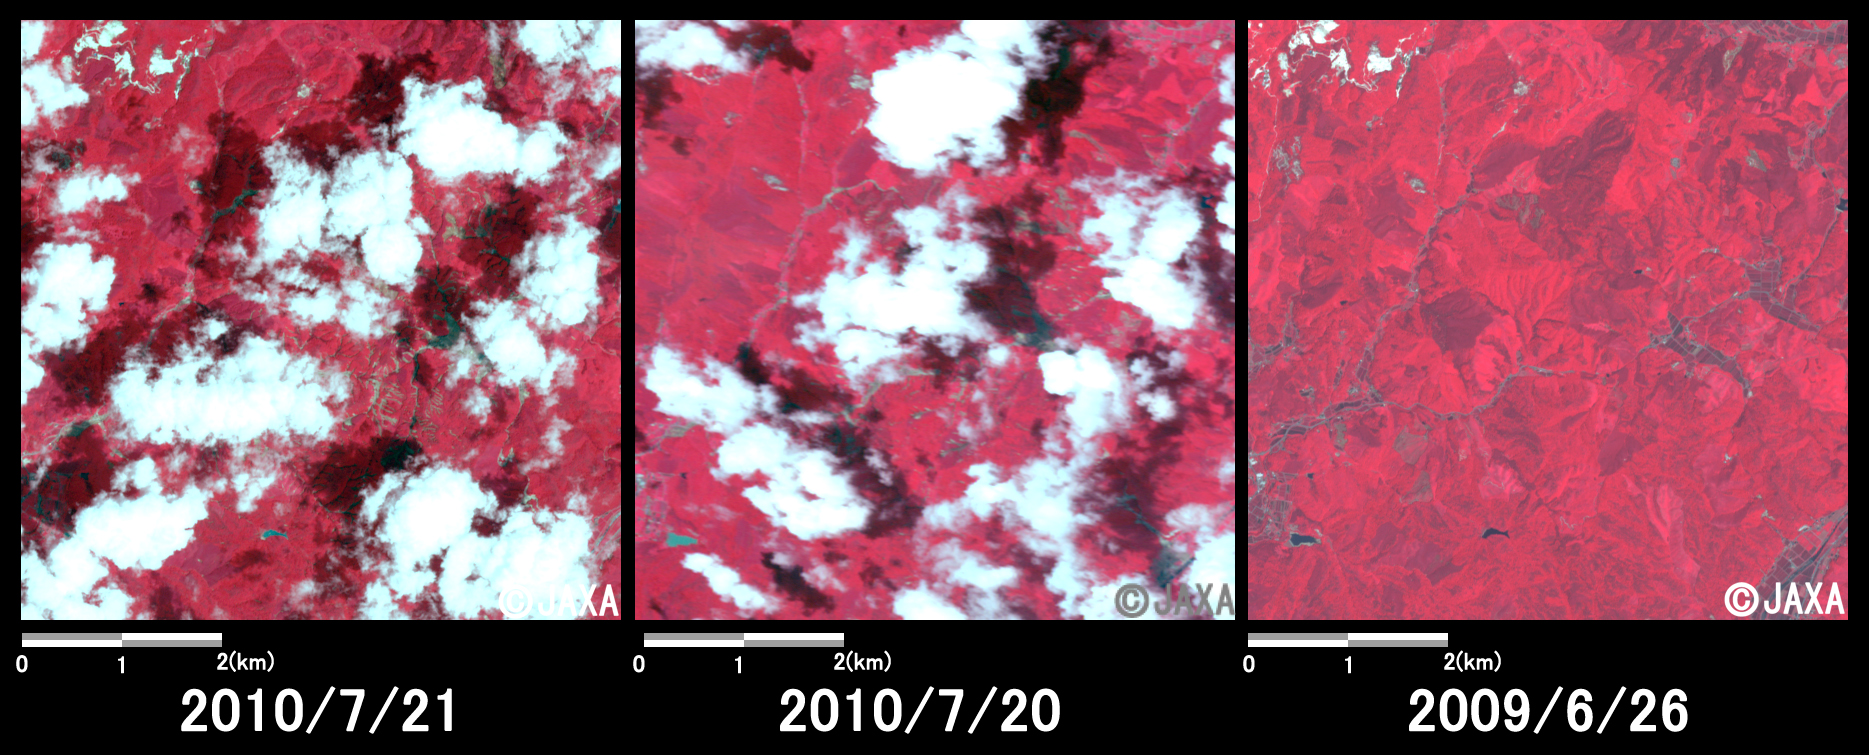 Fig. 2: Enlarged image of Saijo cho, Shobara city where mudslide occurred (36 square kilometers, left: July 21, 2010; middle: July 20, 2010; right: June 26, 2009).